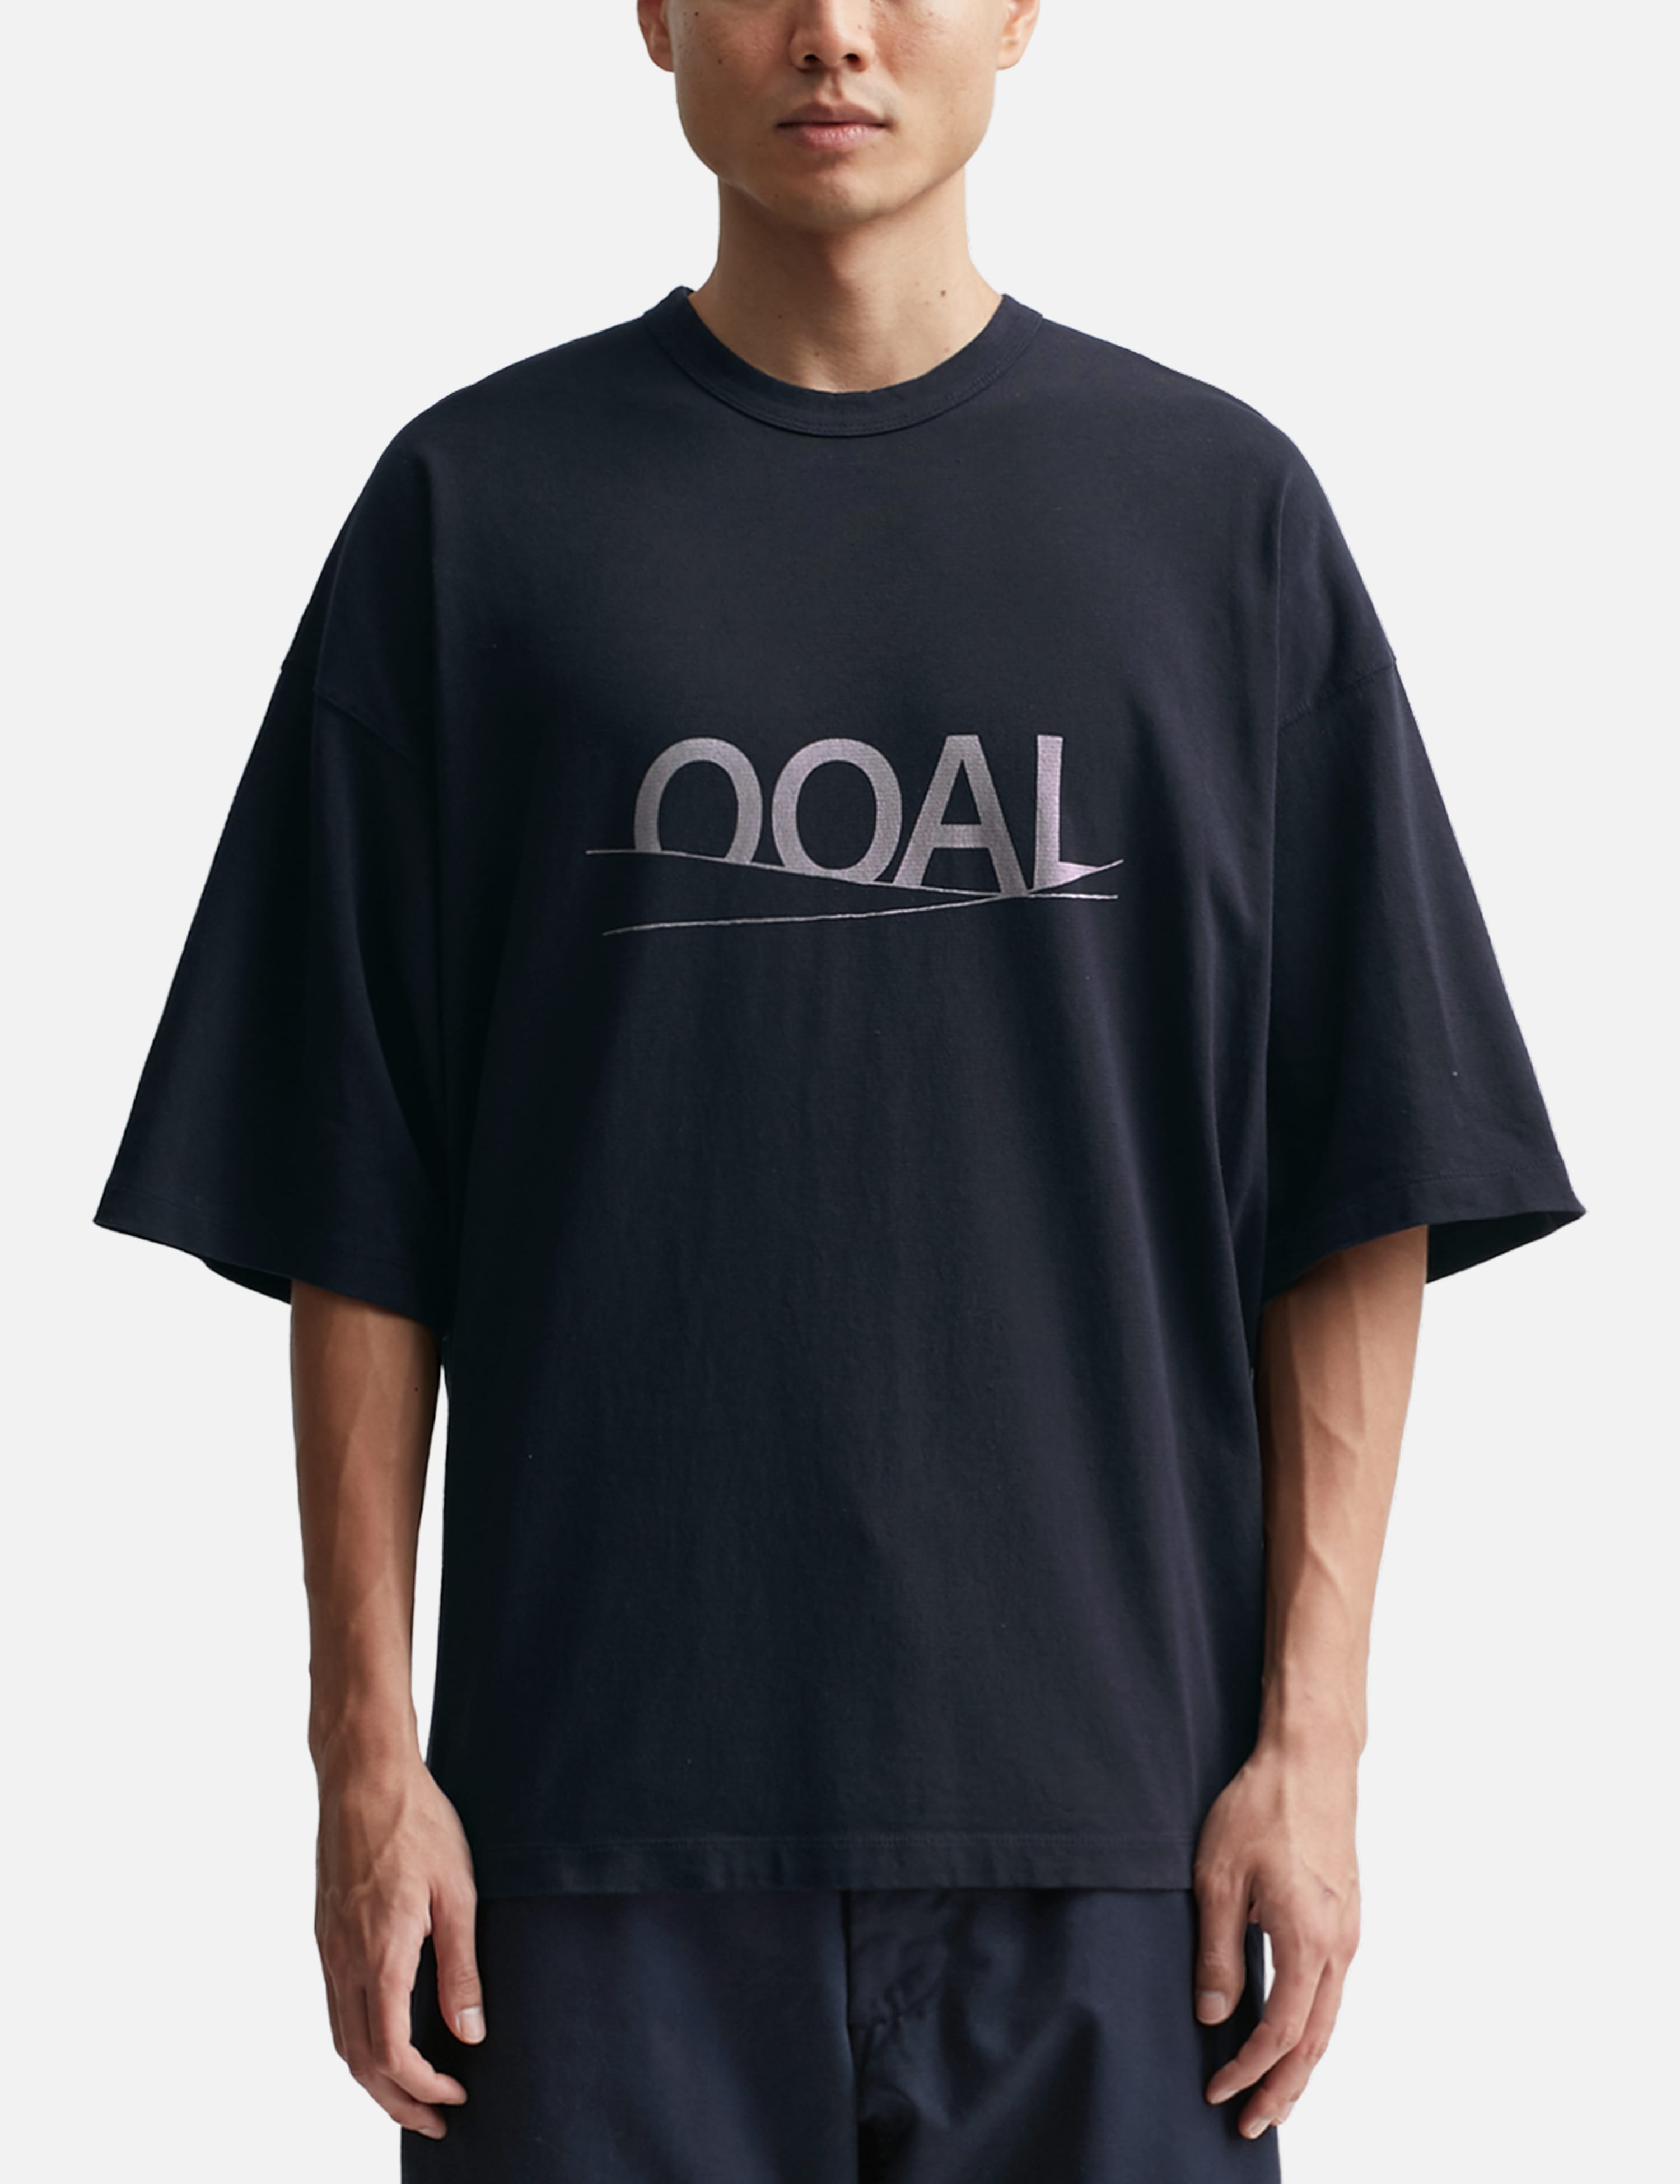 Nanamica - OOAL Oversized T-shirt | HBX - Globally Curated Fashion 